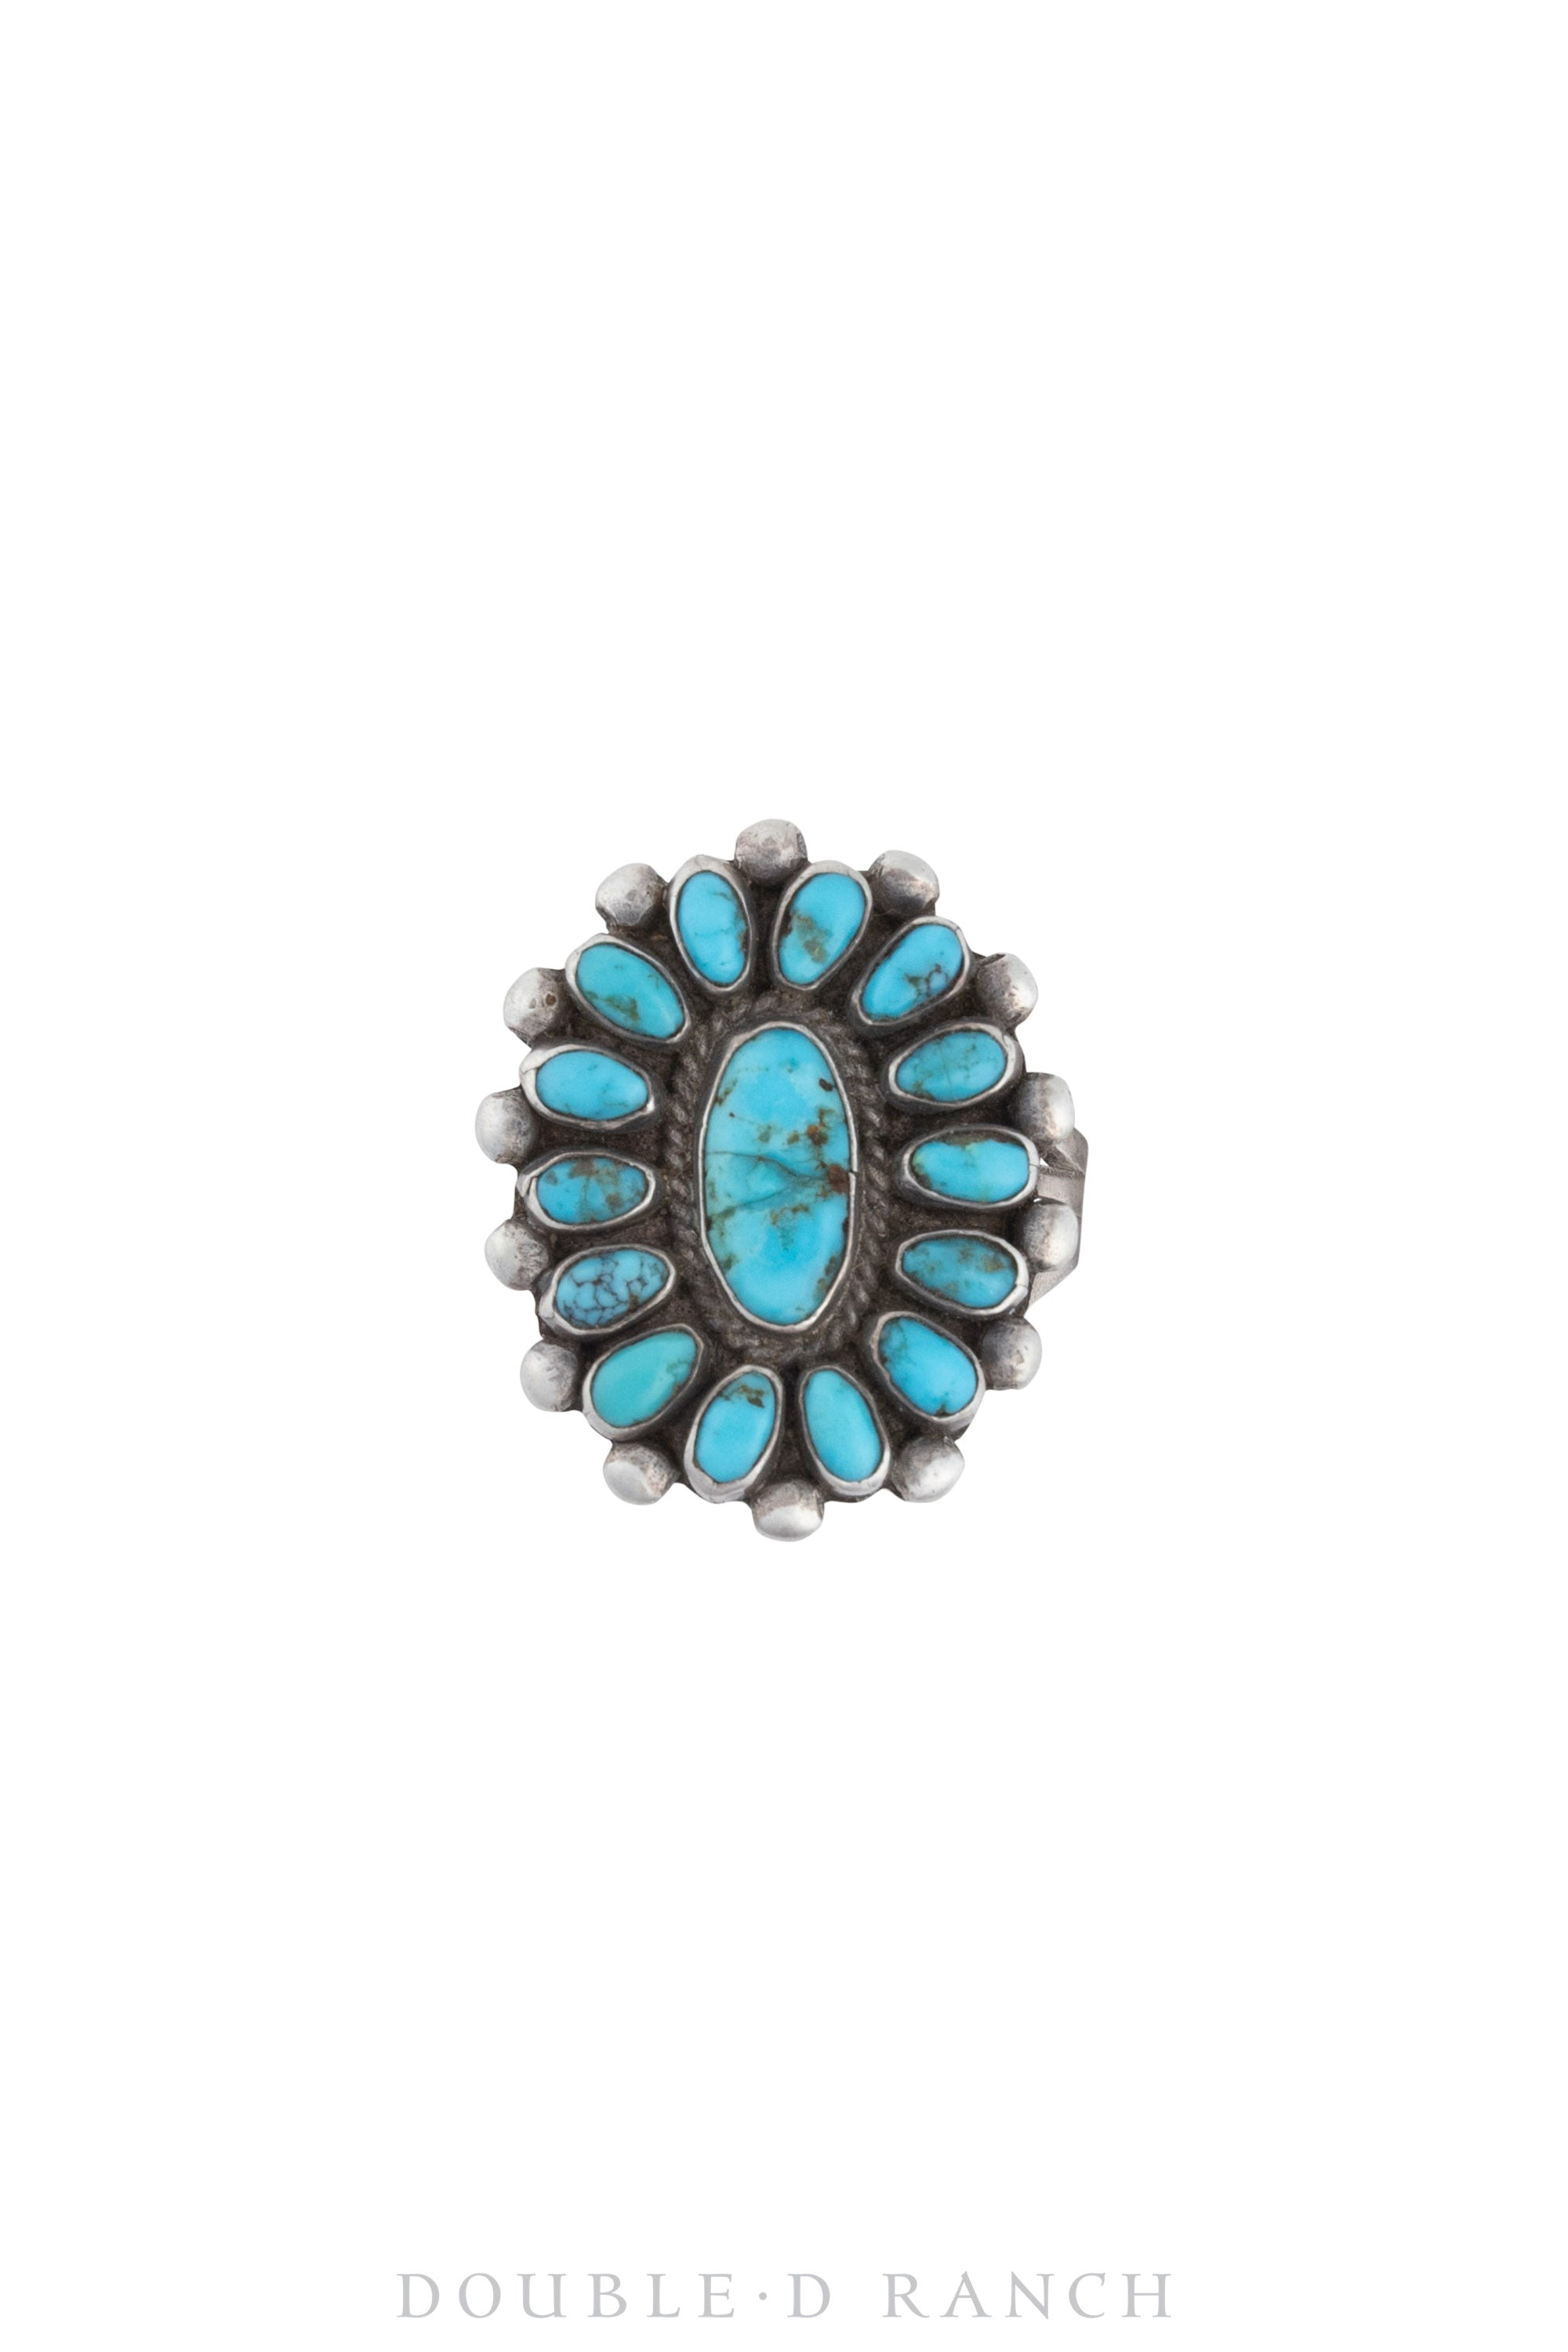 Ring, Cluster, Turquoise, Zuni, Vintage ‘40s, 1374